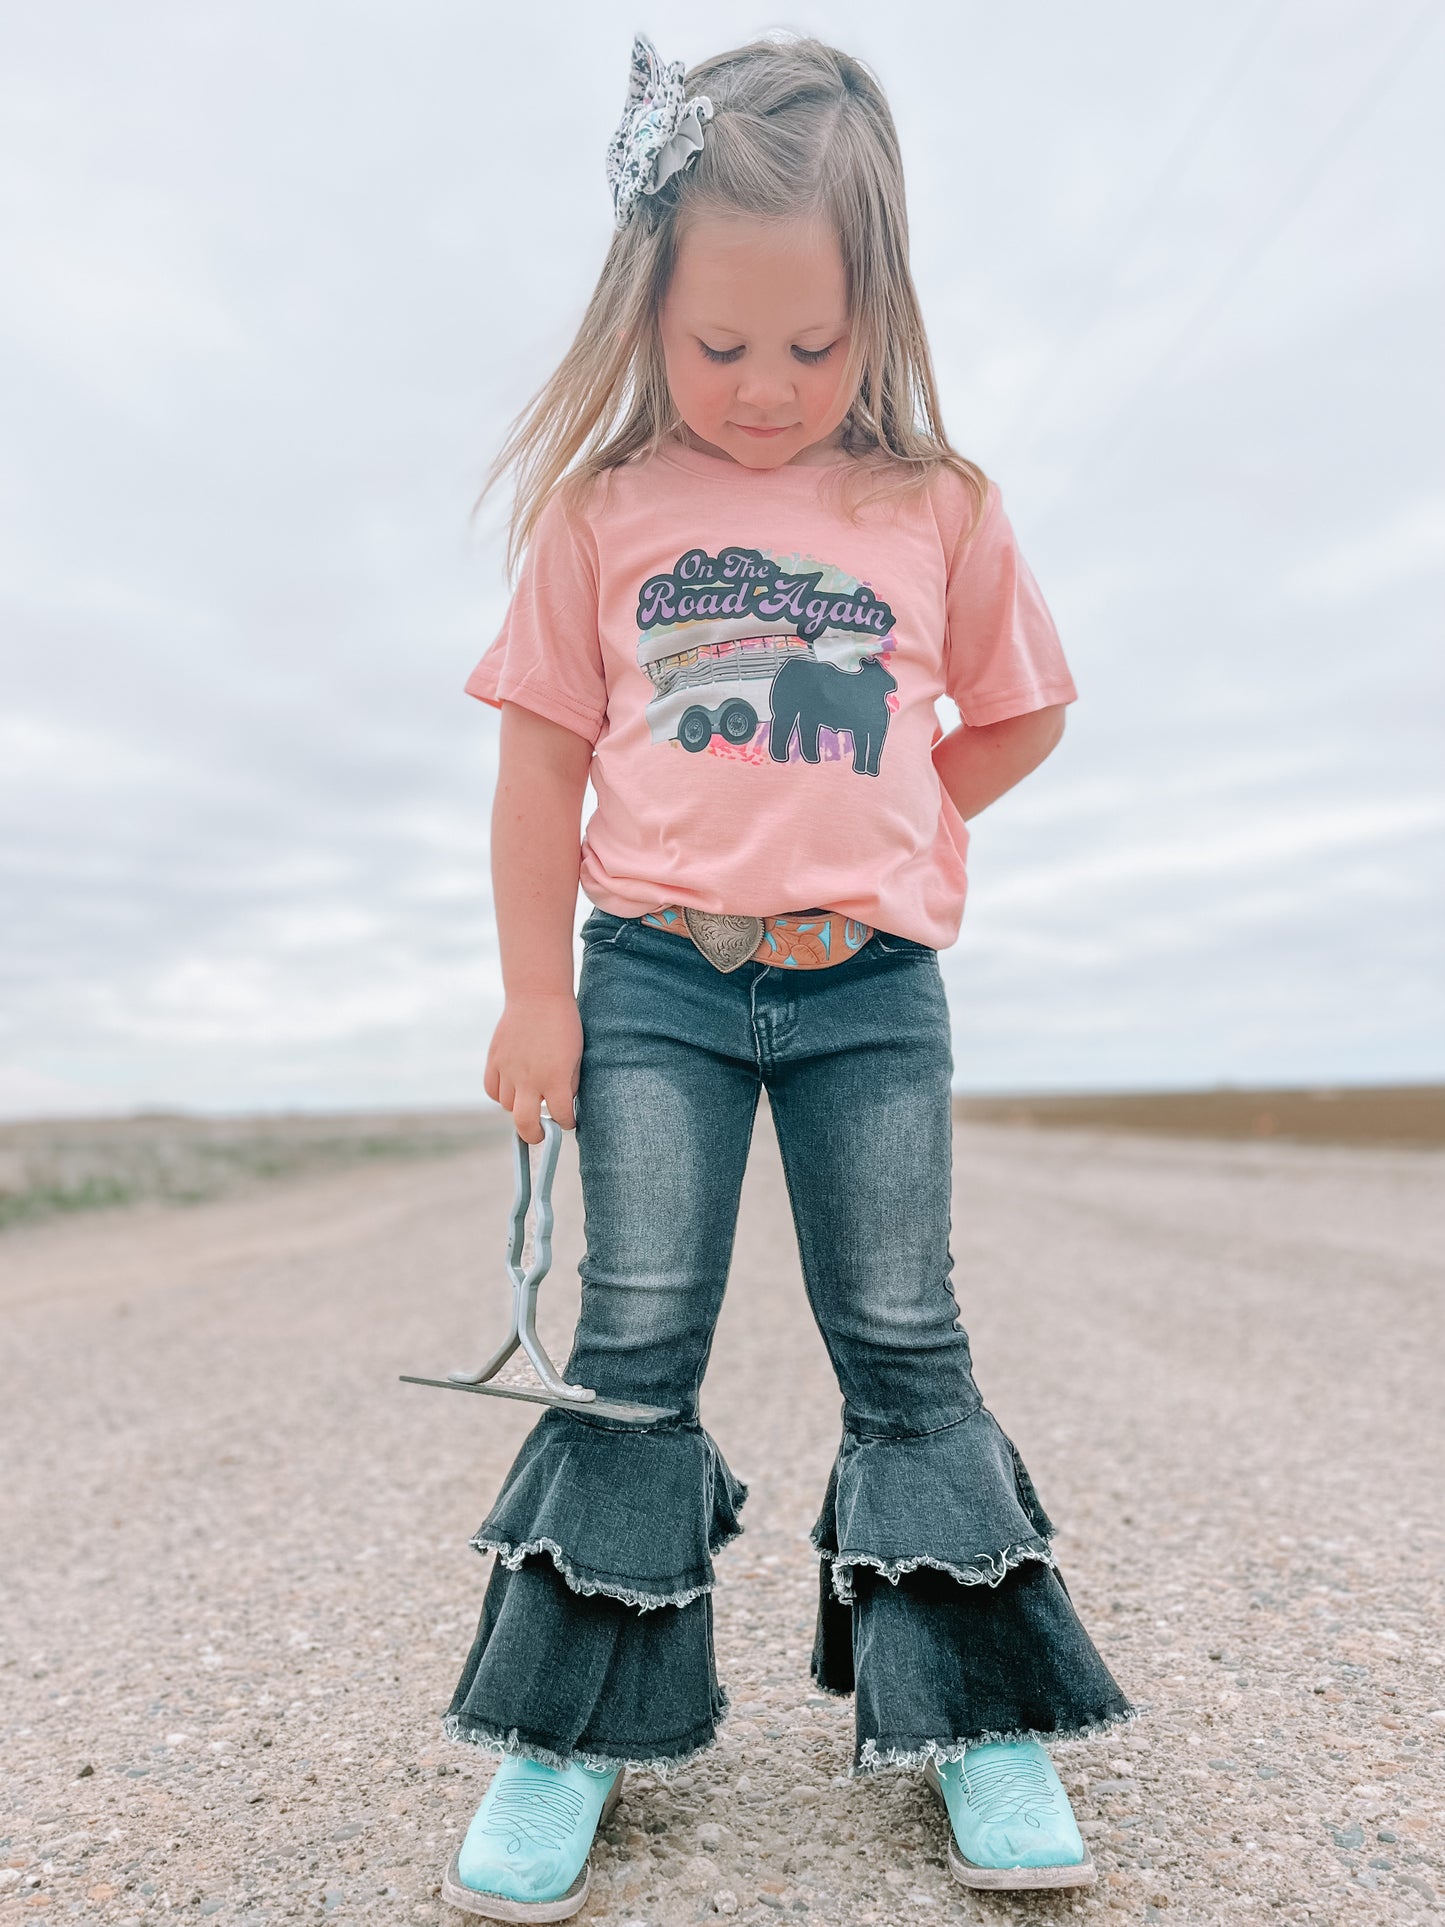 the On the |Road| Again littles tee